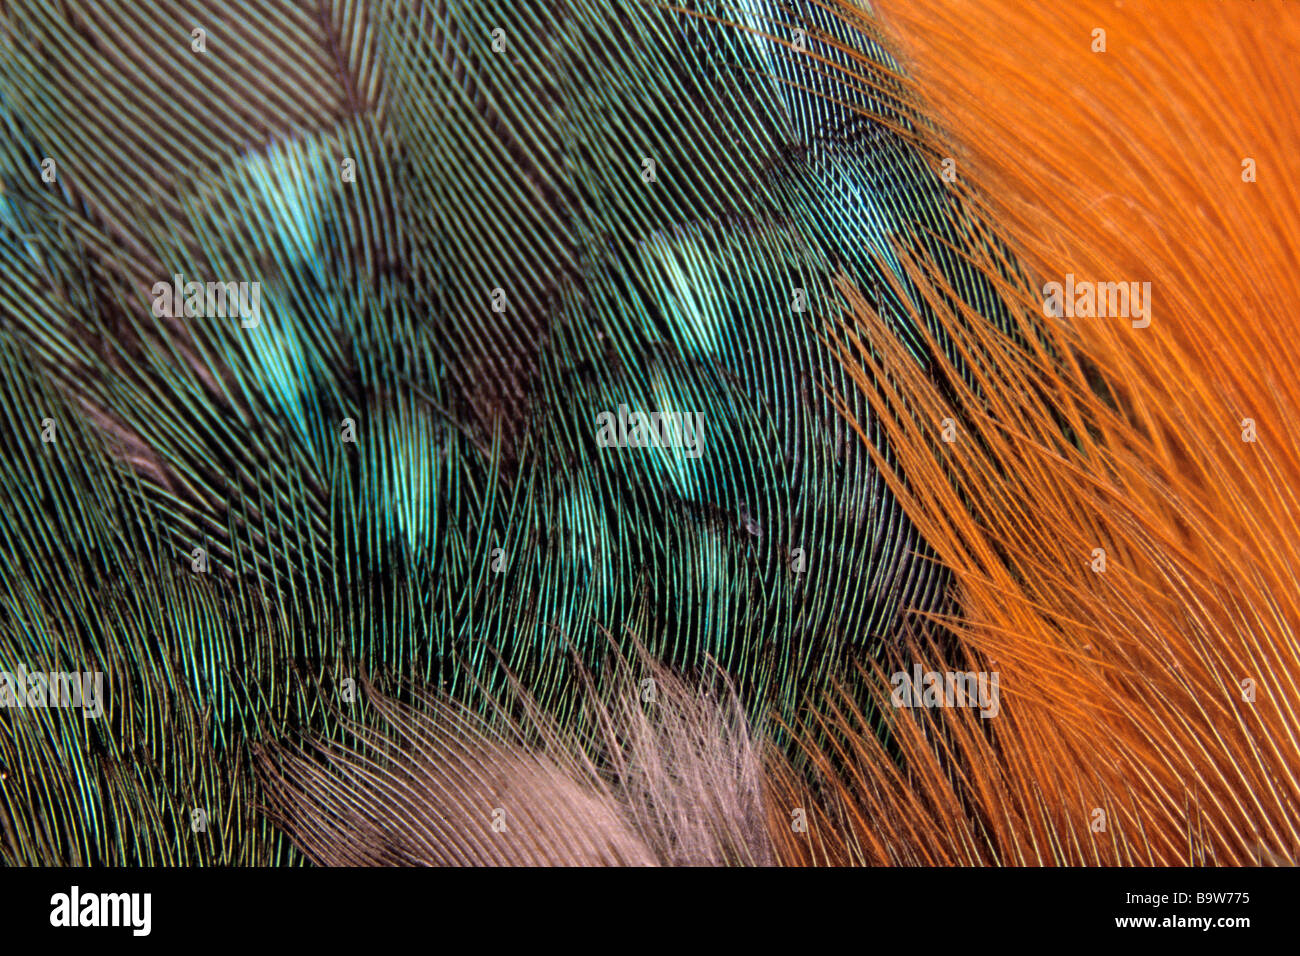 Kingfisher (Alcedo atthis), feather details of green, blue and reddish feathers Stock Photo